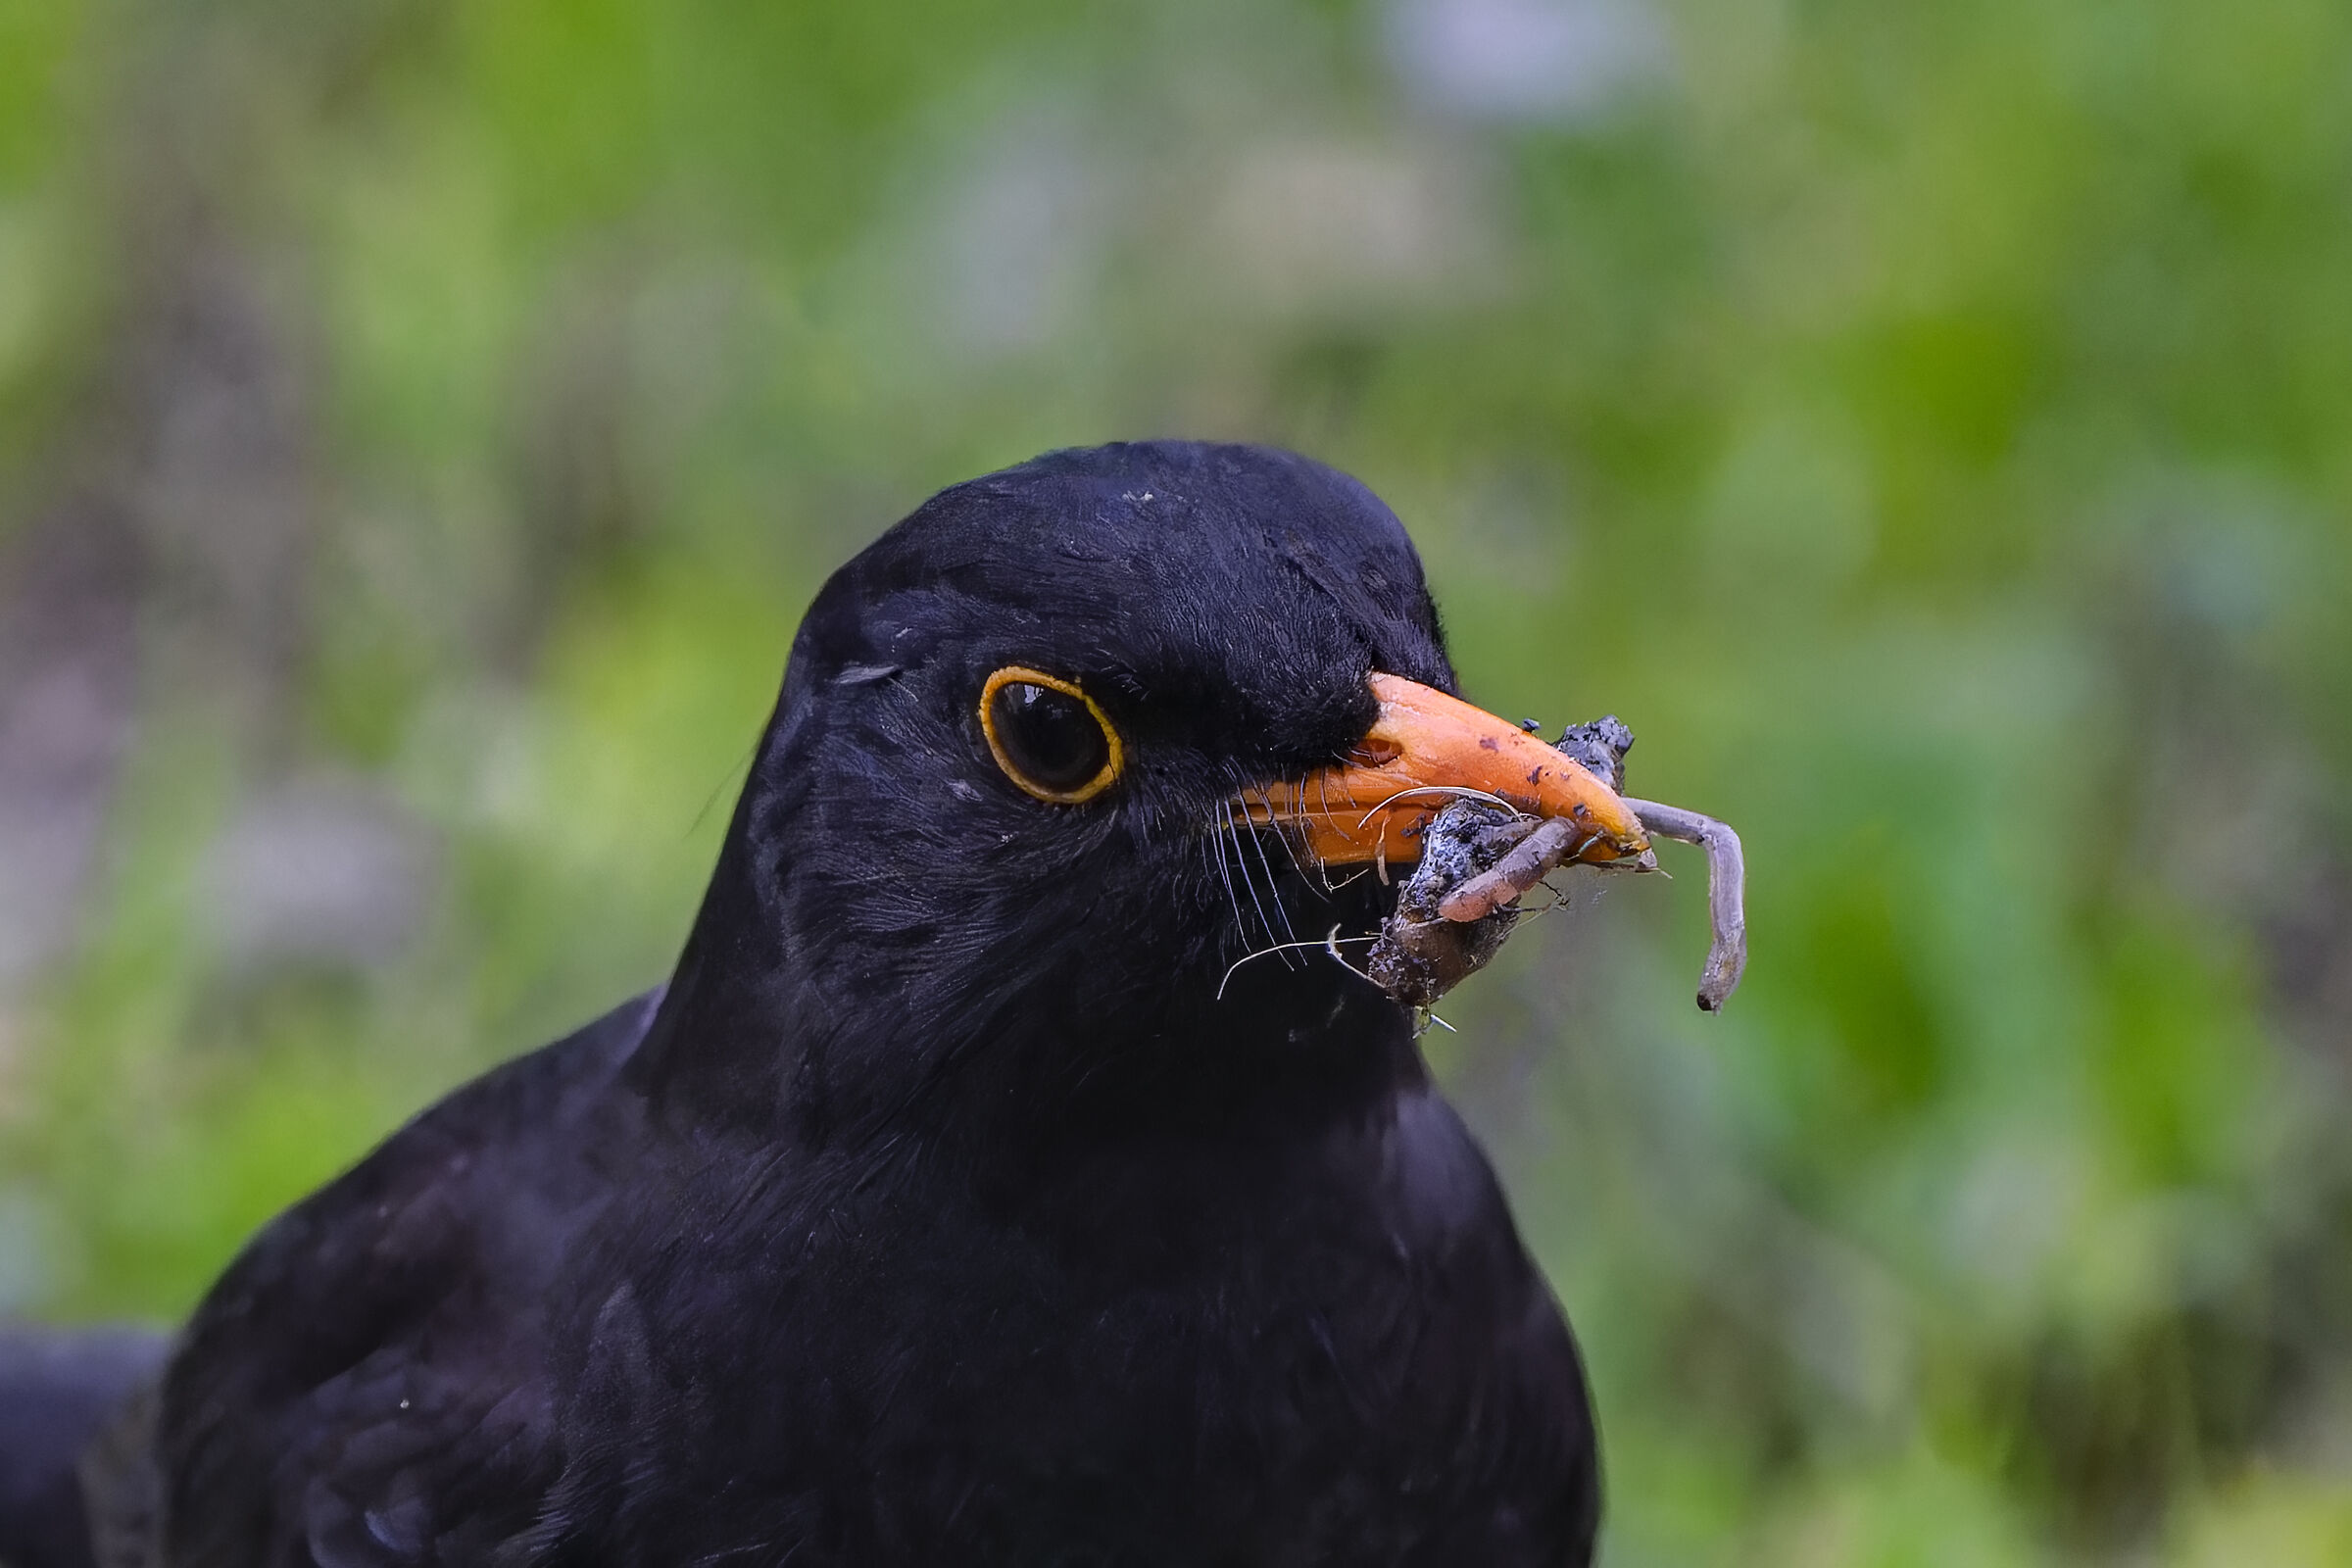 The blackbird with dinner for offspring...